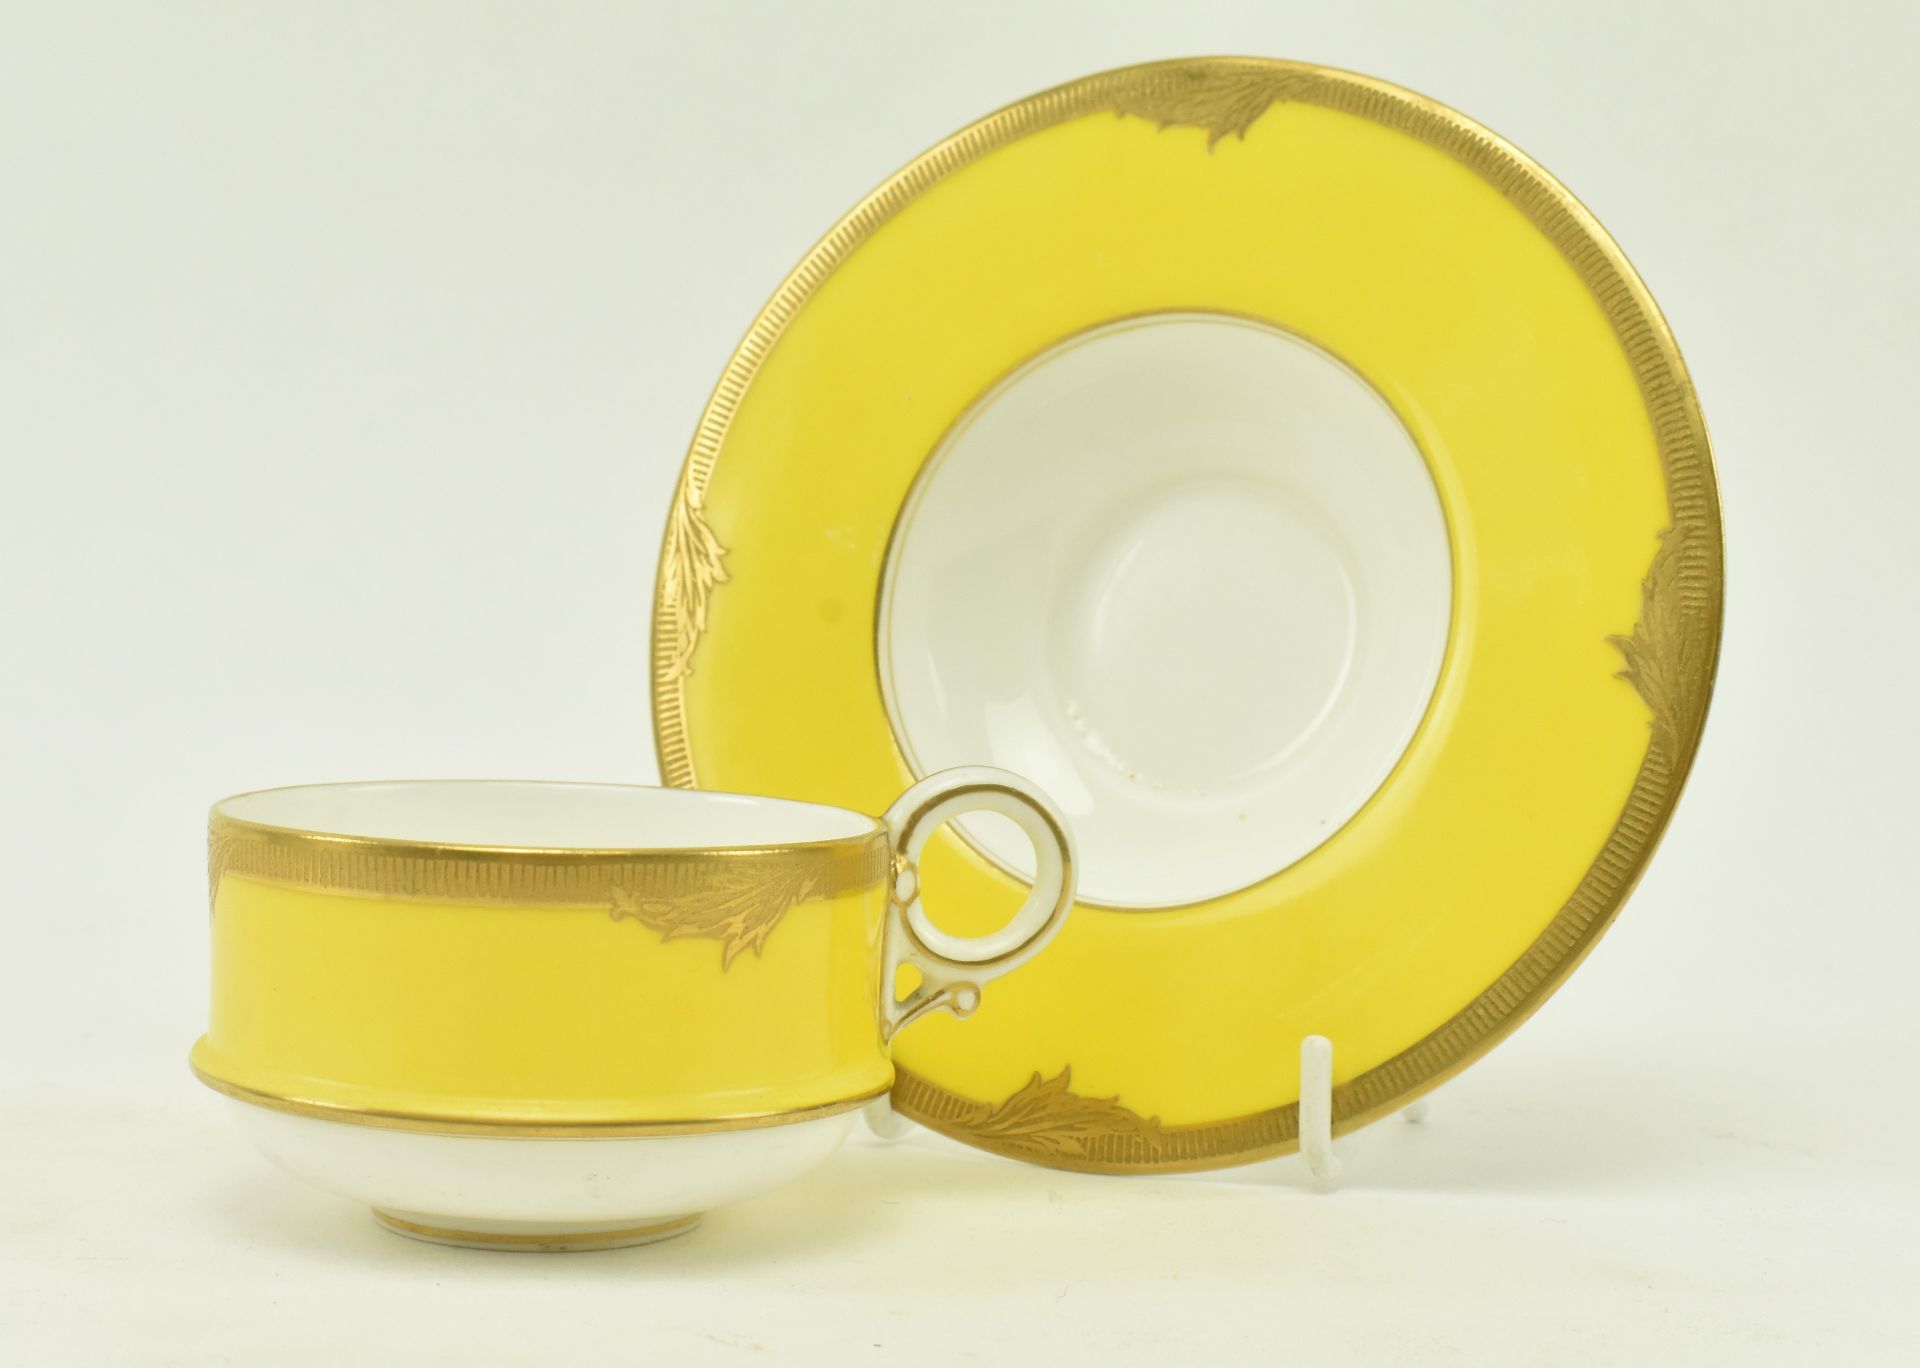 EARLY 20TH CENTURY ROYAL WORCESTER YELLOW TEACUP & SAUCER - Image 3 of 7